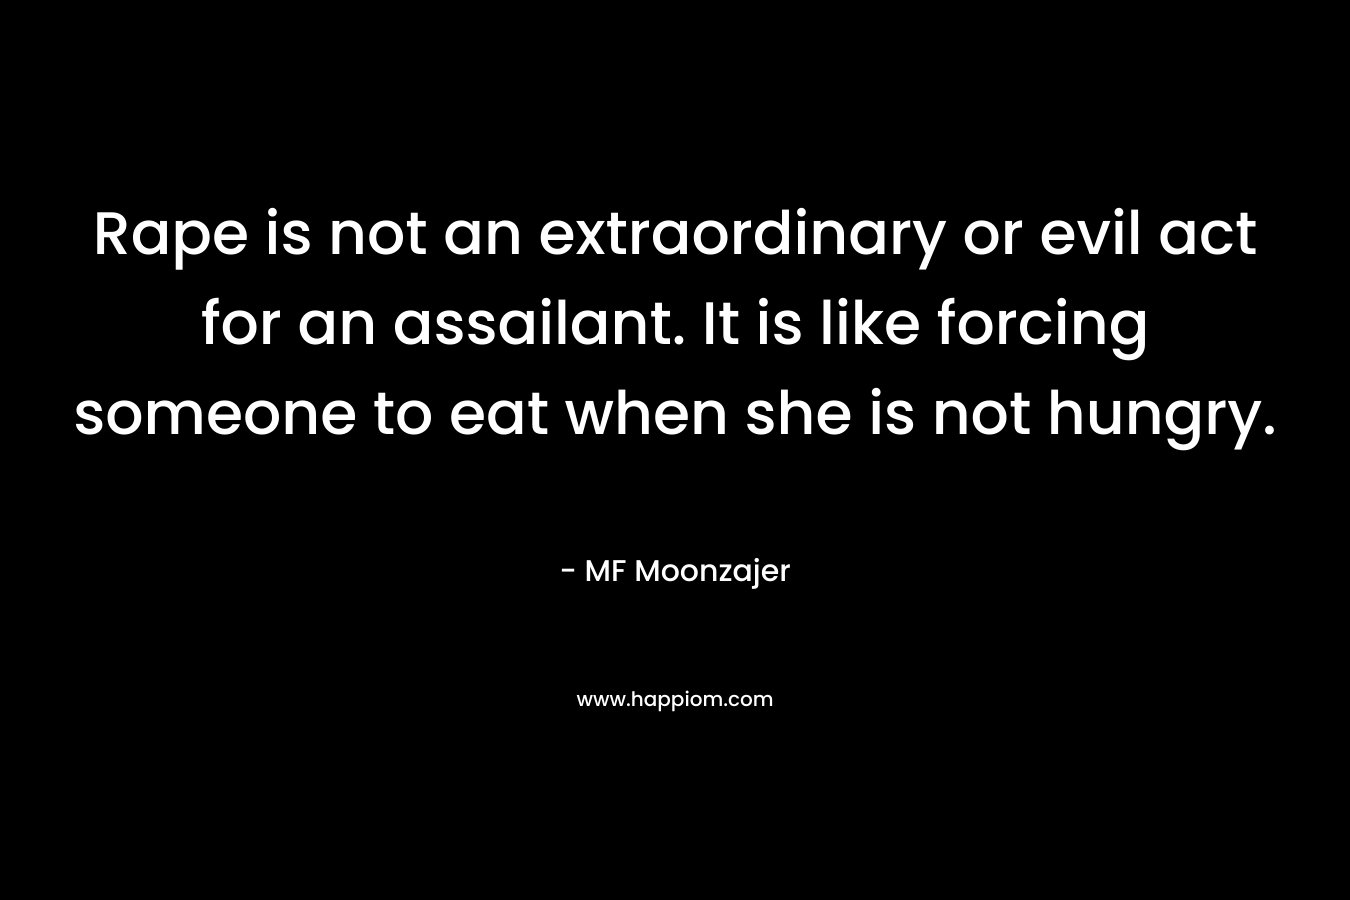 Rape is not an extraordinary or evil act for an assailant. It is like forcing someone to eat when she is not hungry. – MF Moonzajer